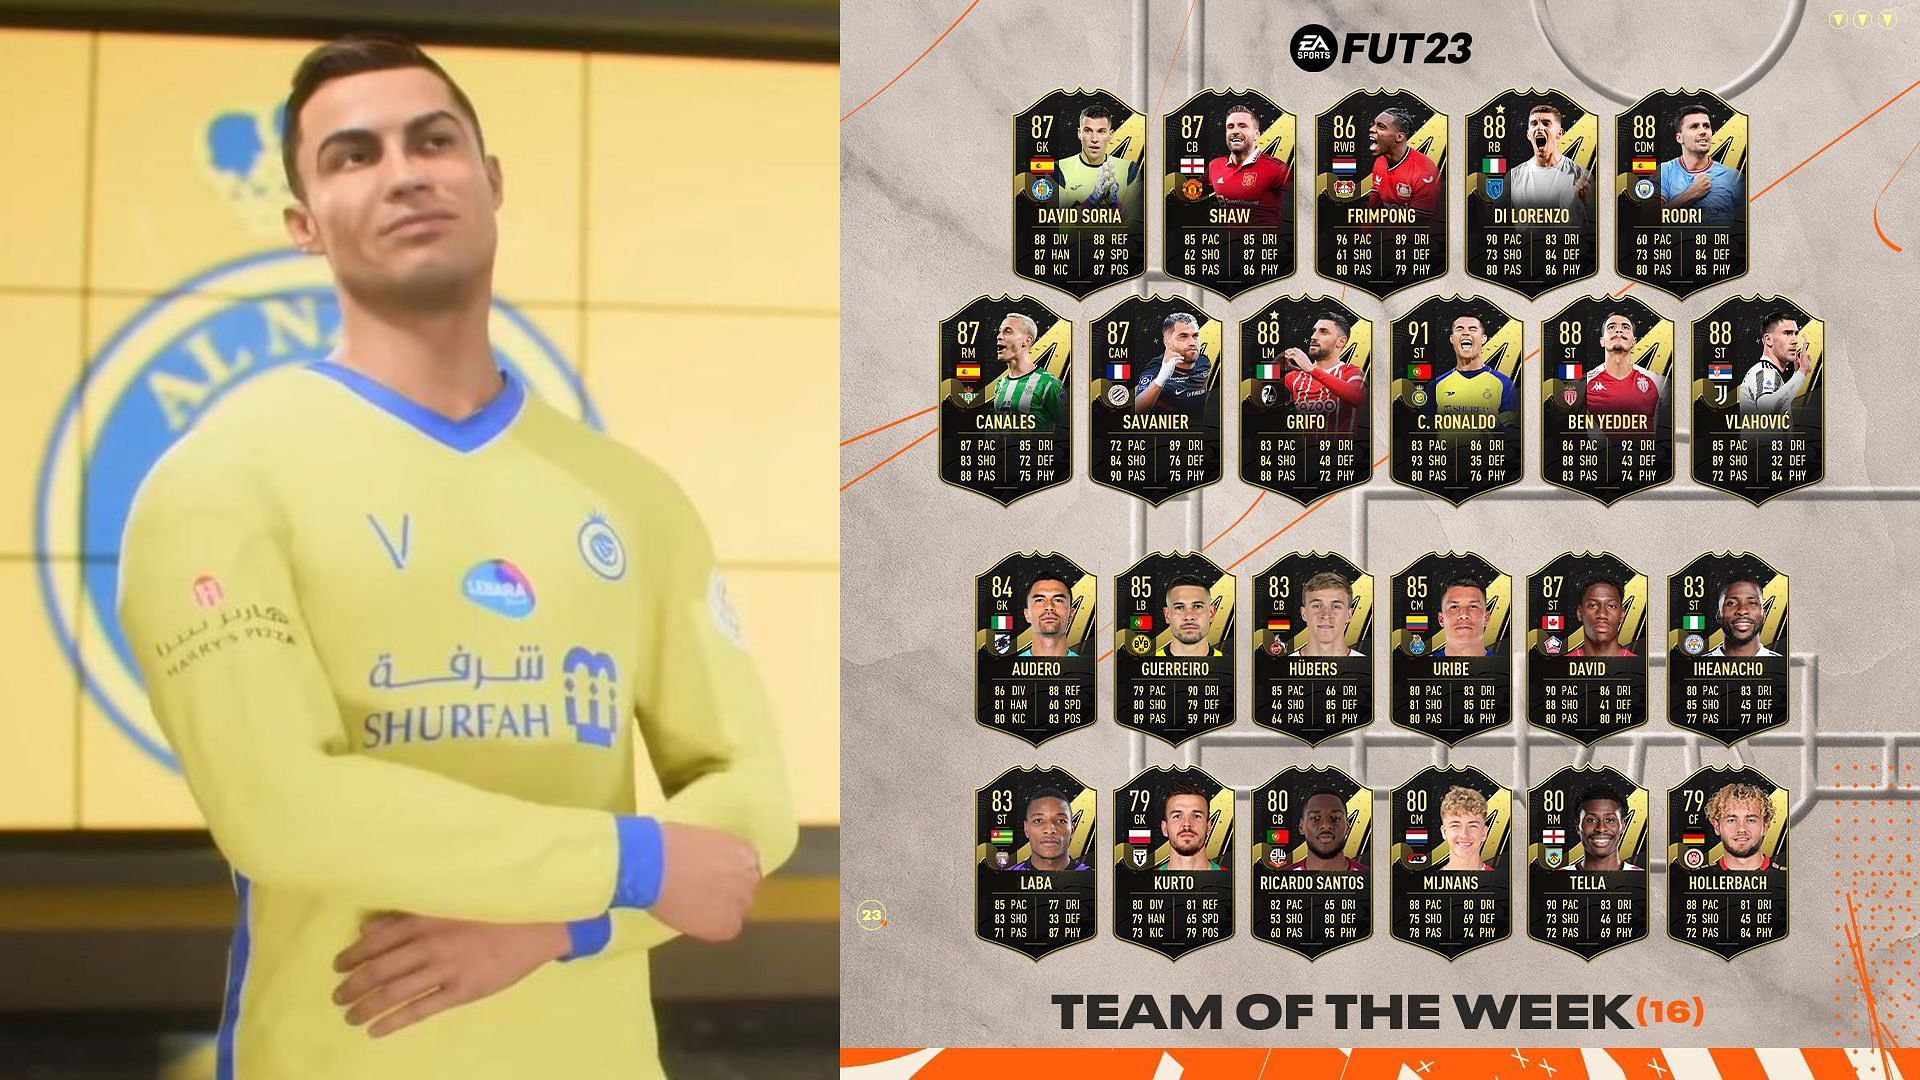 Team of the Week 16 has been released in FIFA 23 (Image via EA Sports FIFA)